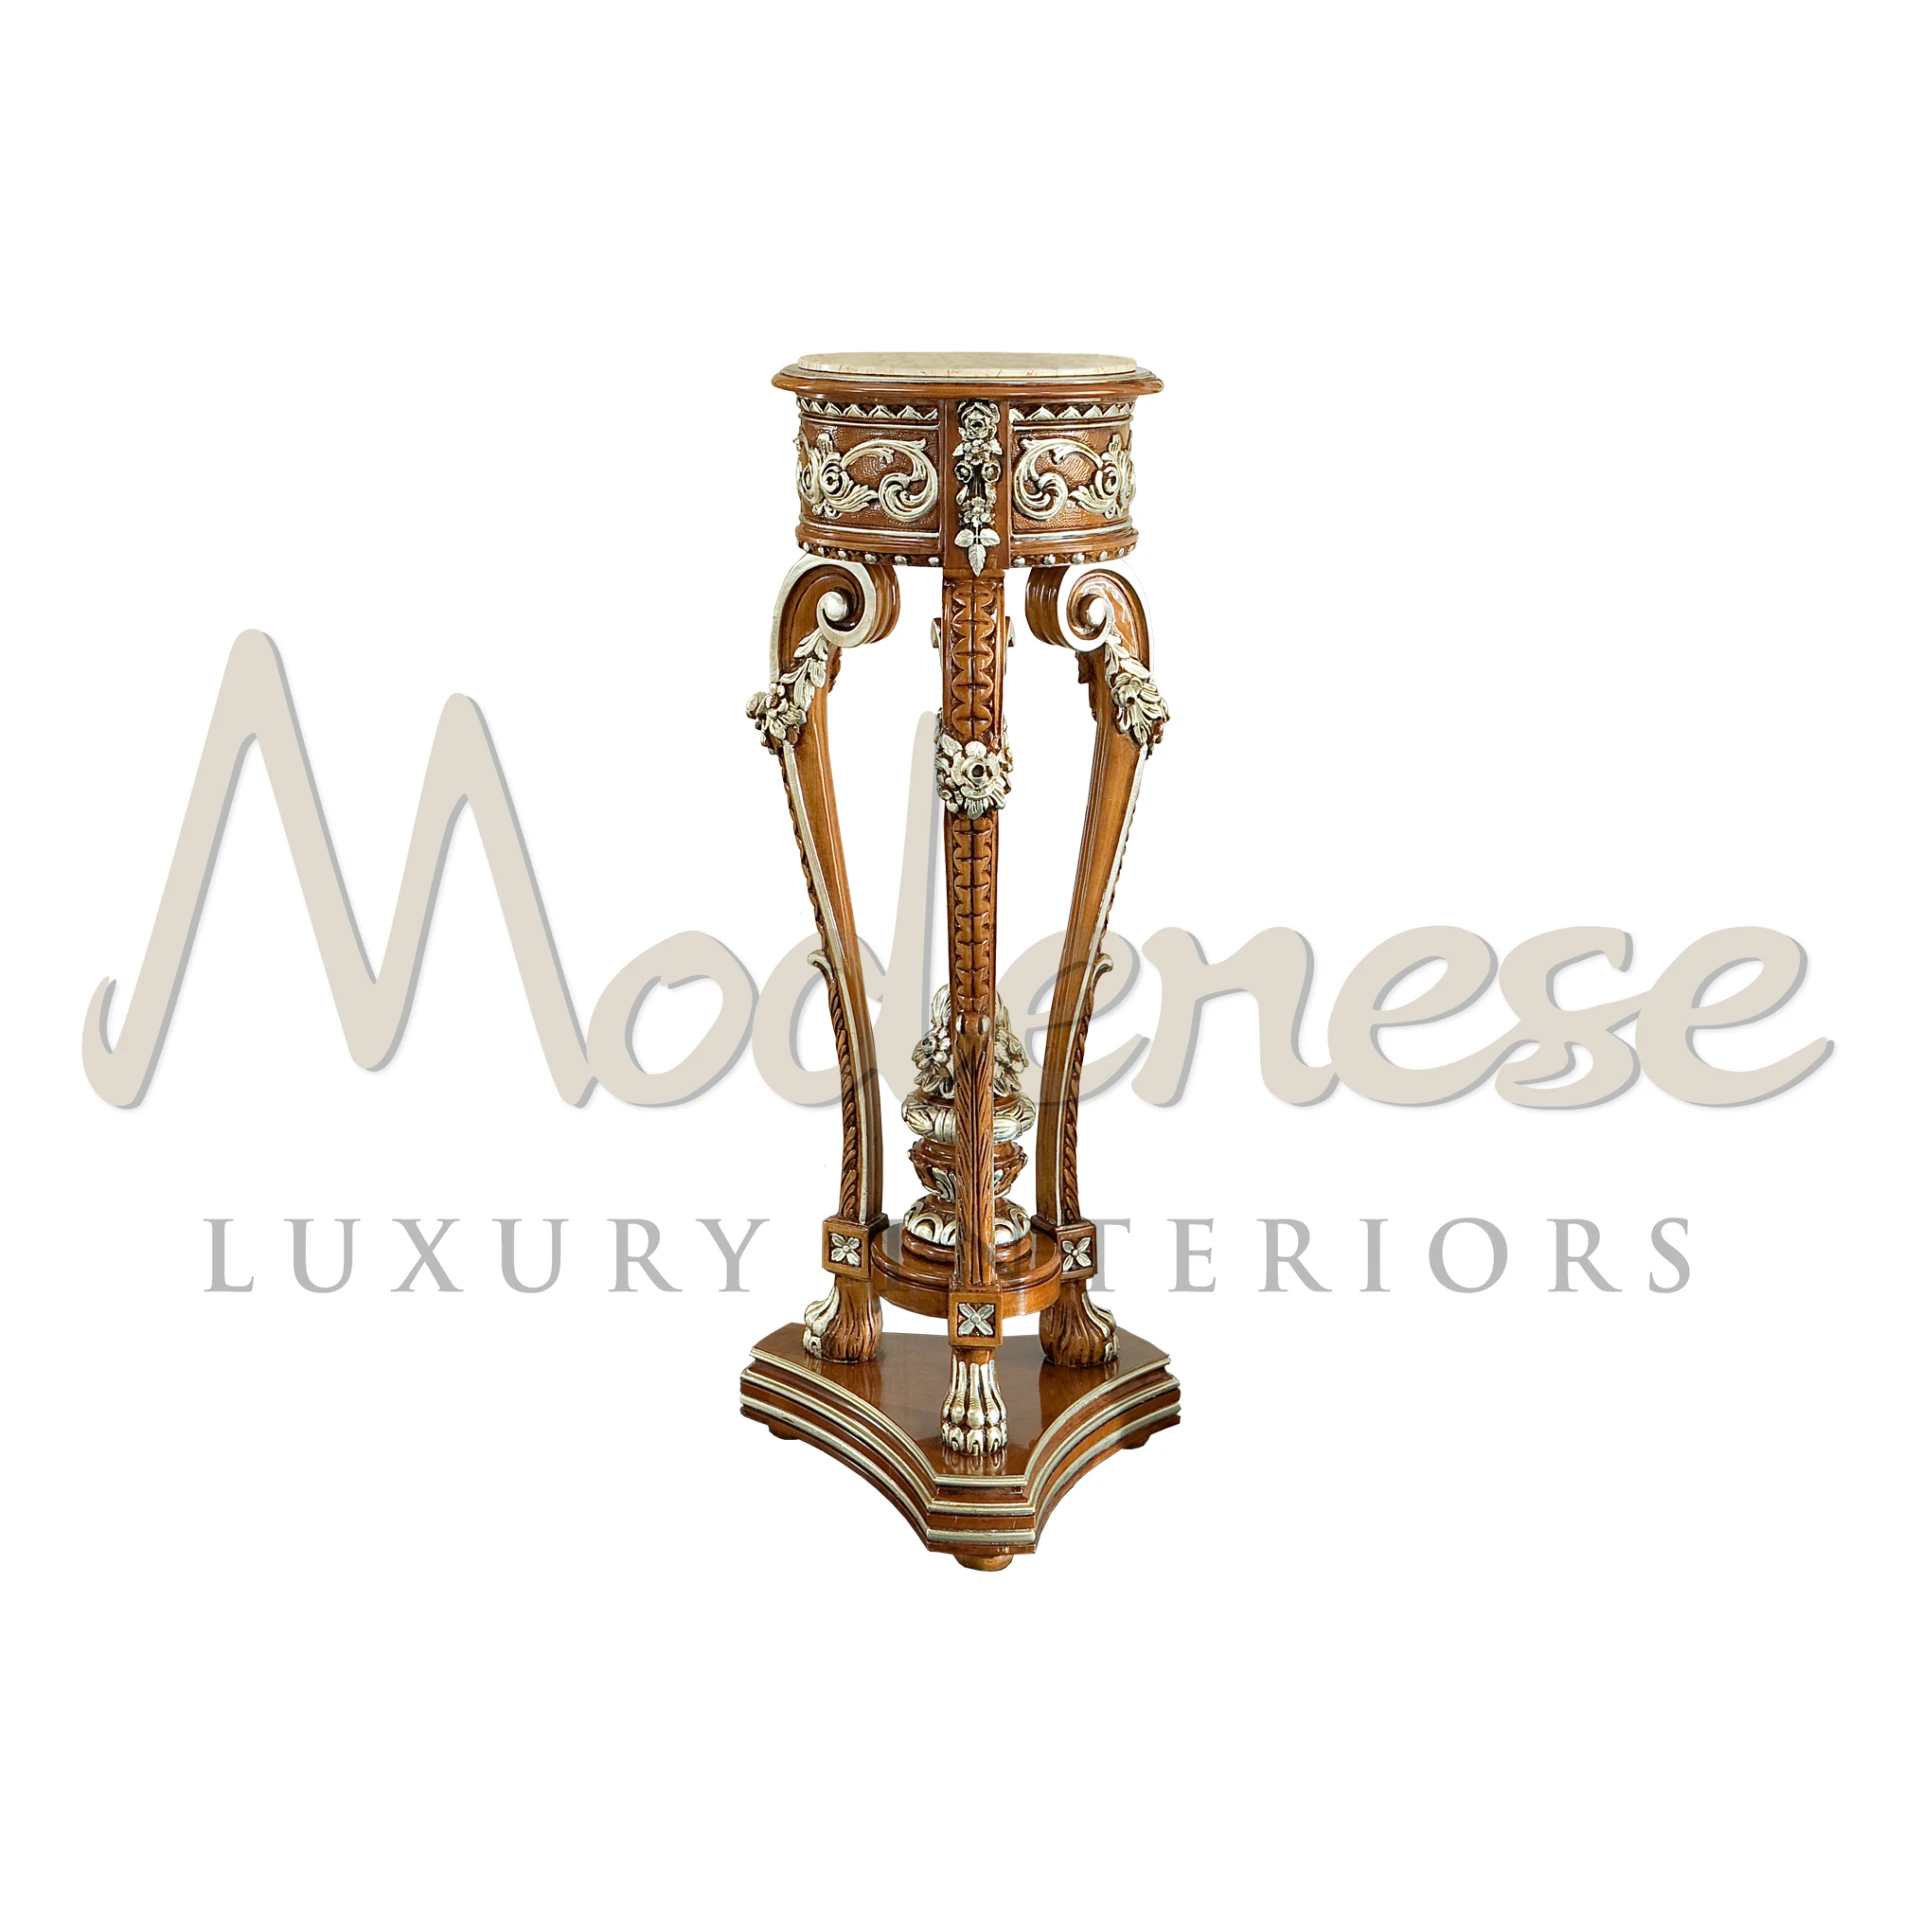 Elegance Vase Stand with Classic Walnut Finishing and Gold Leaf Details